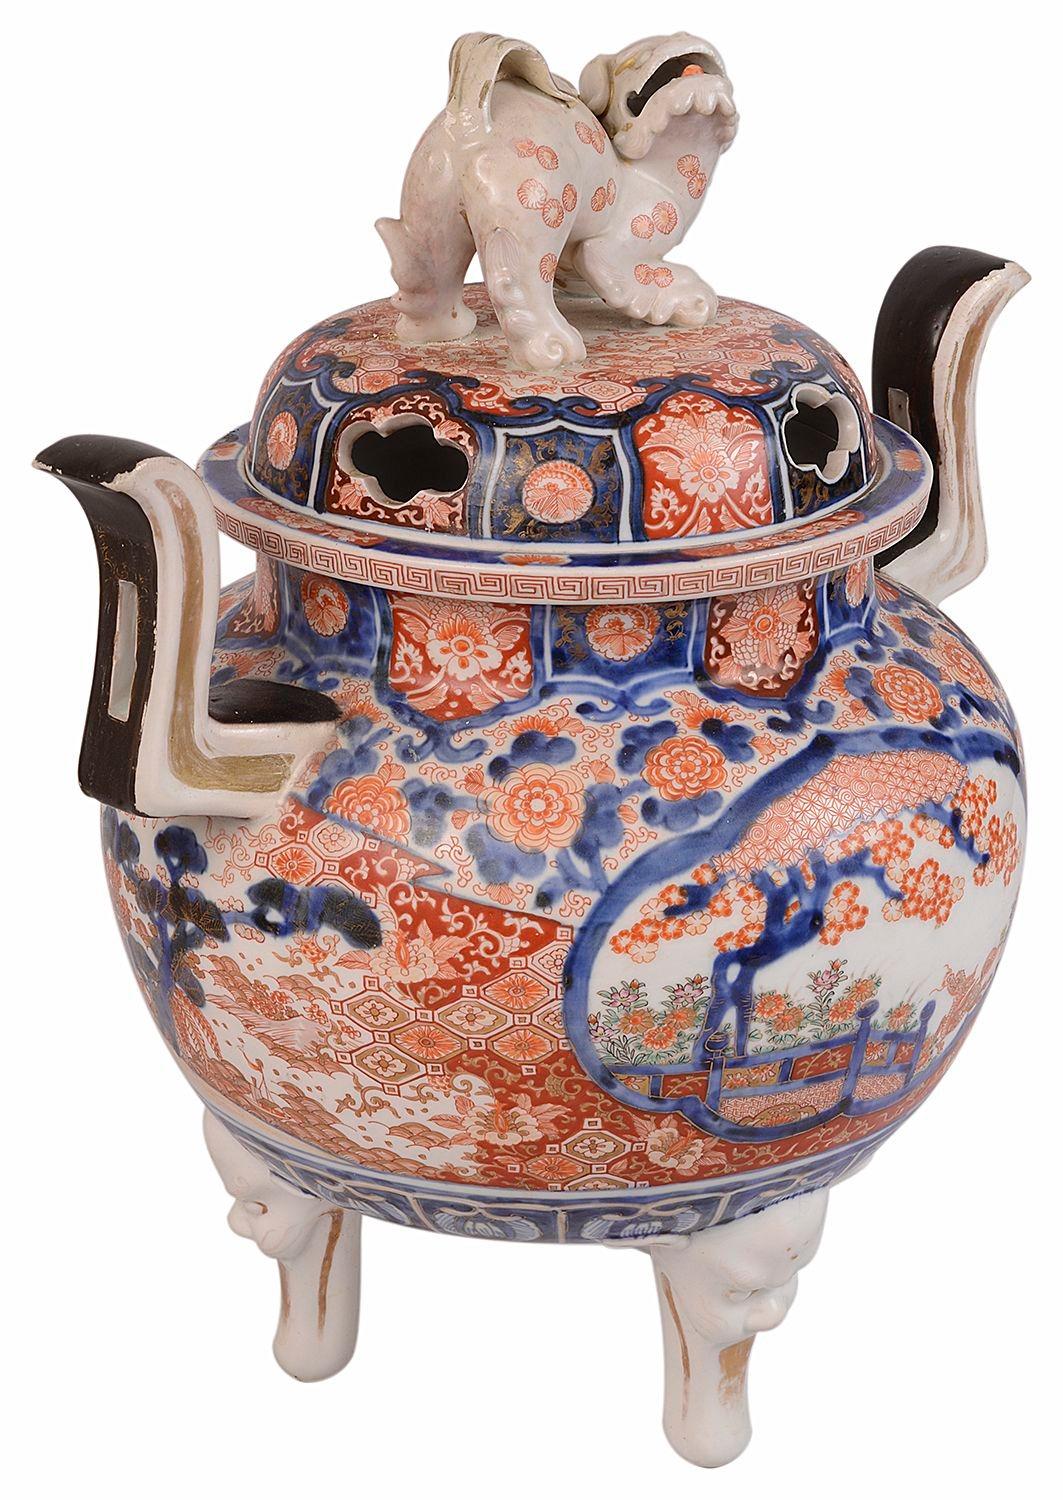 A very good quality 19th century Japanese lidded Imari Koro, in the classical bold blue and orange Imari colours, depicting classical motif flower and foliate decoration, The pierced lid with a Foo dog finial and inset hand painted panels with